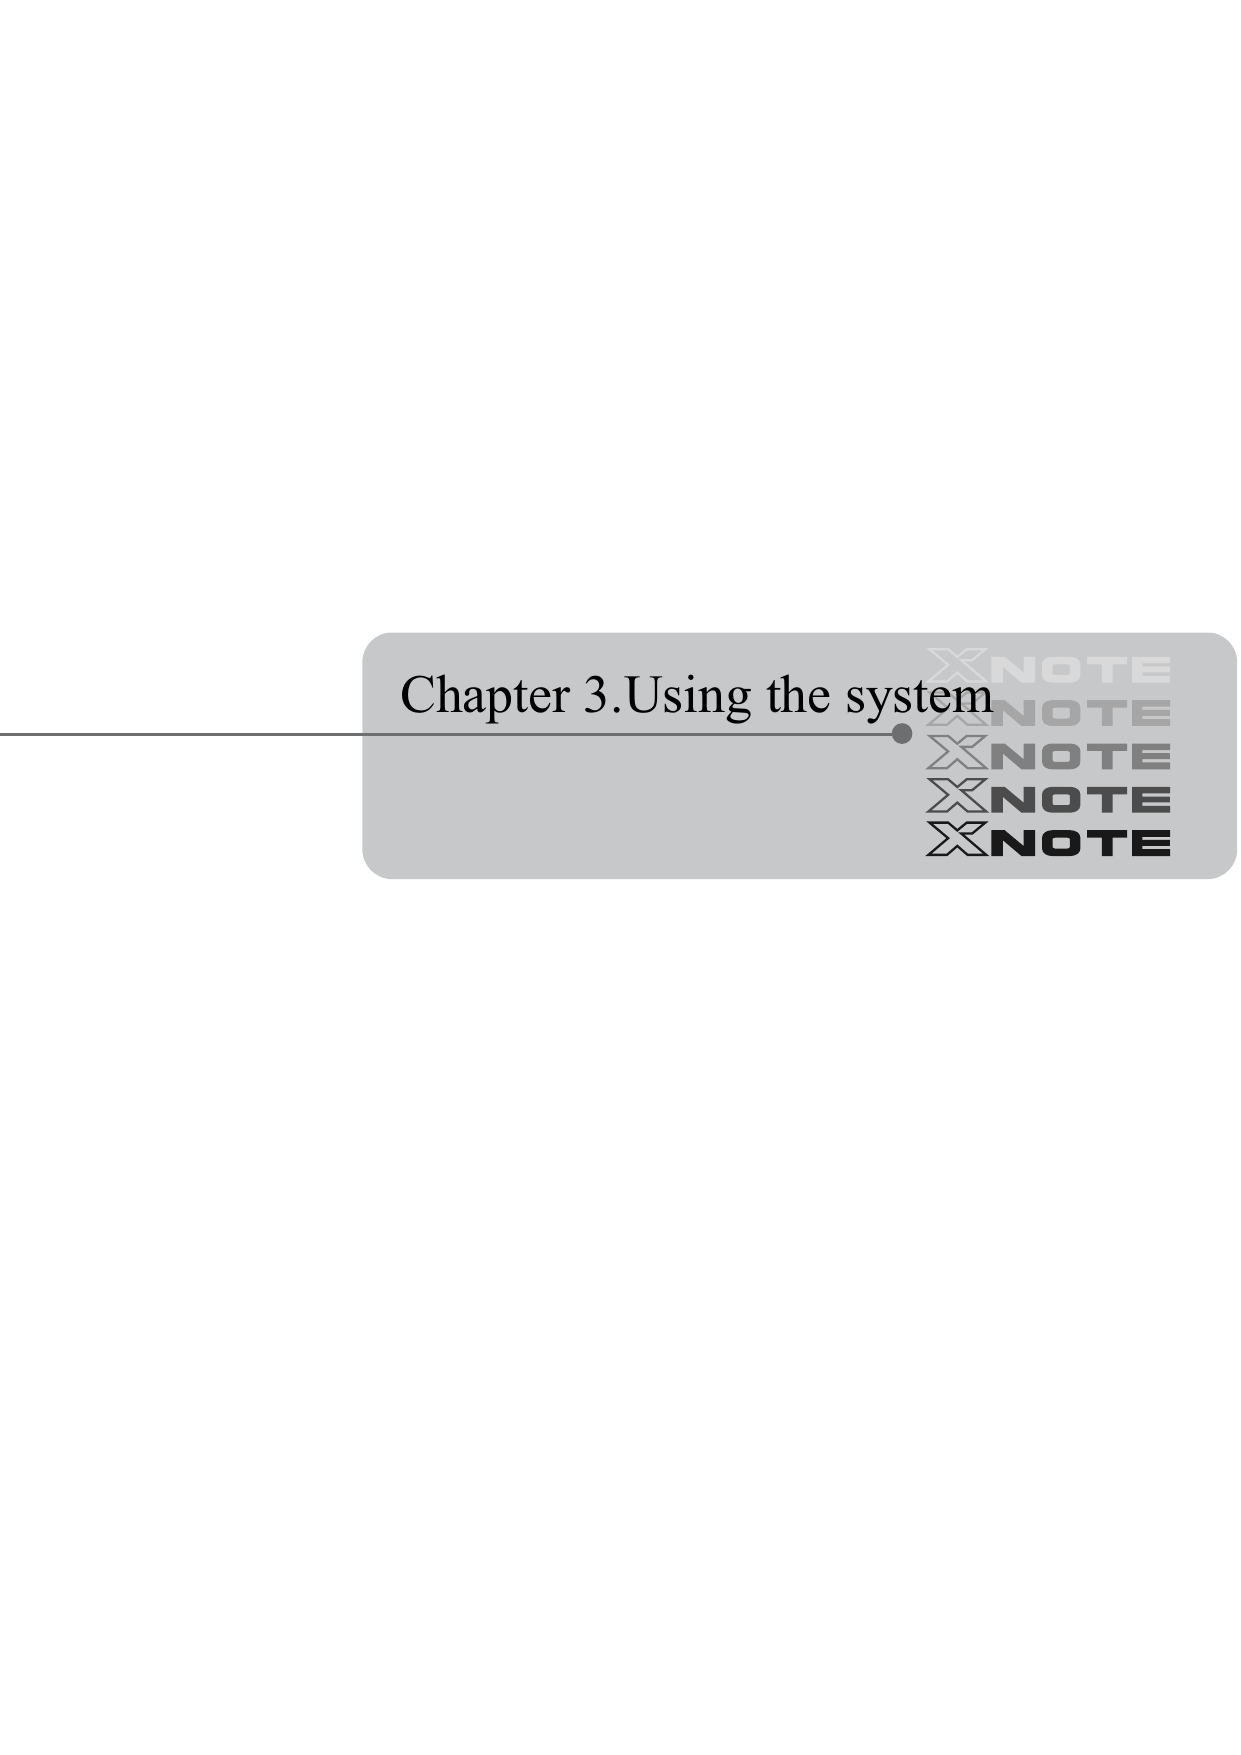  Chapter 3.Using the system